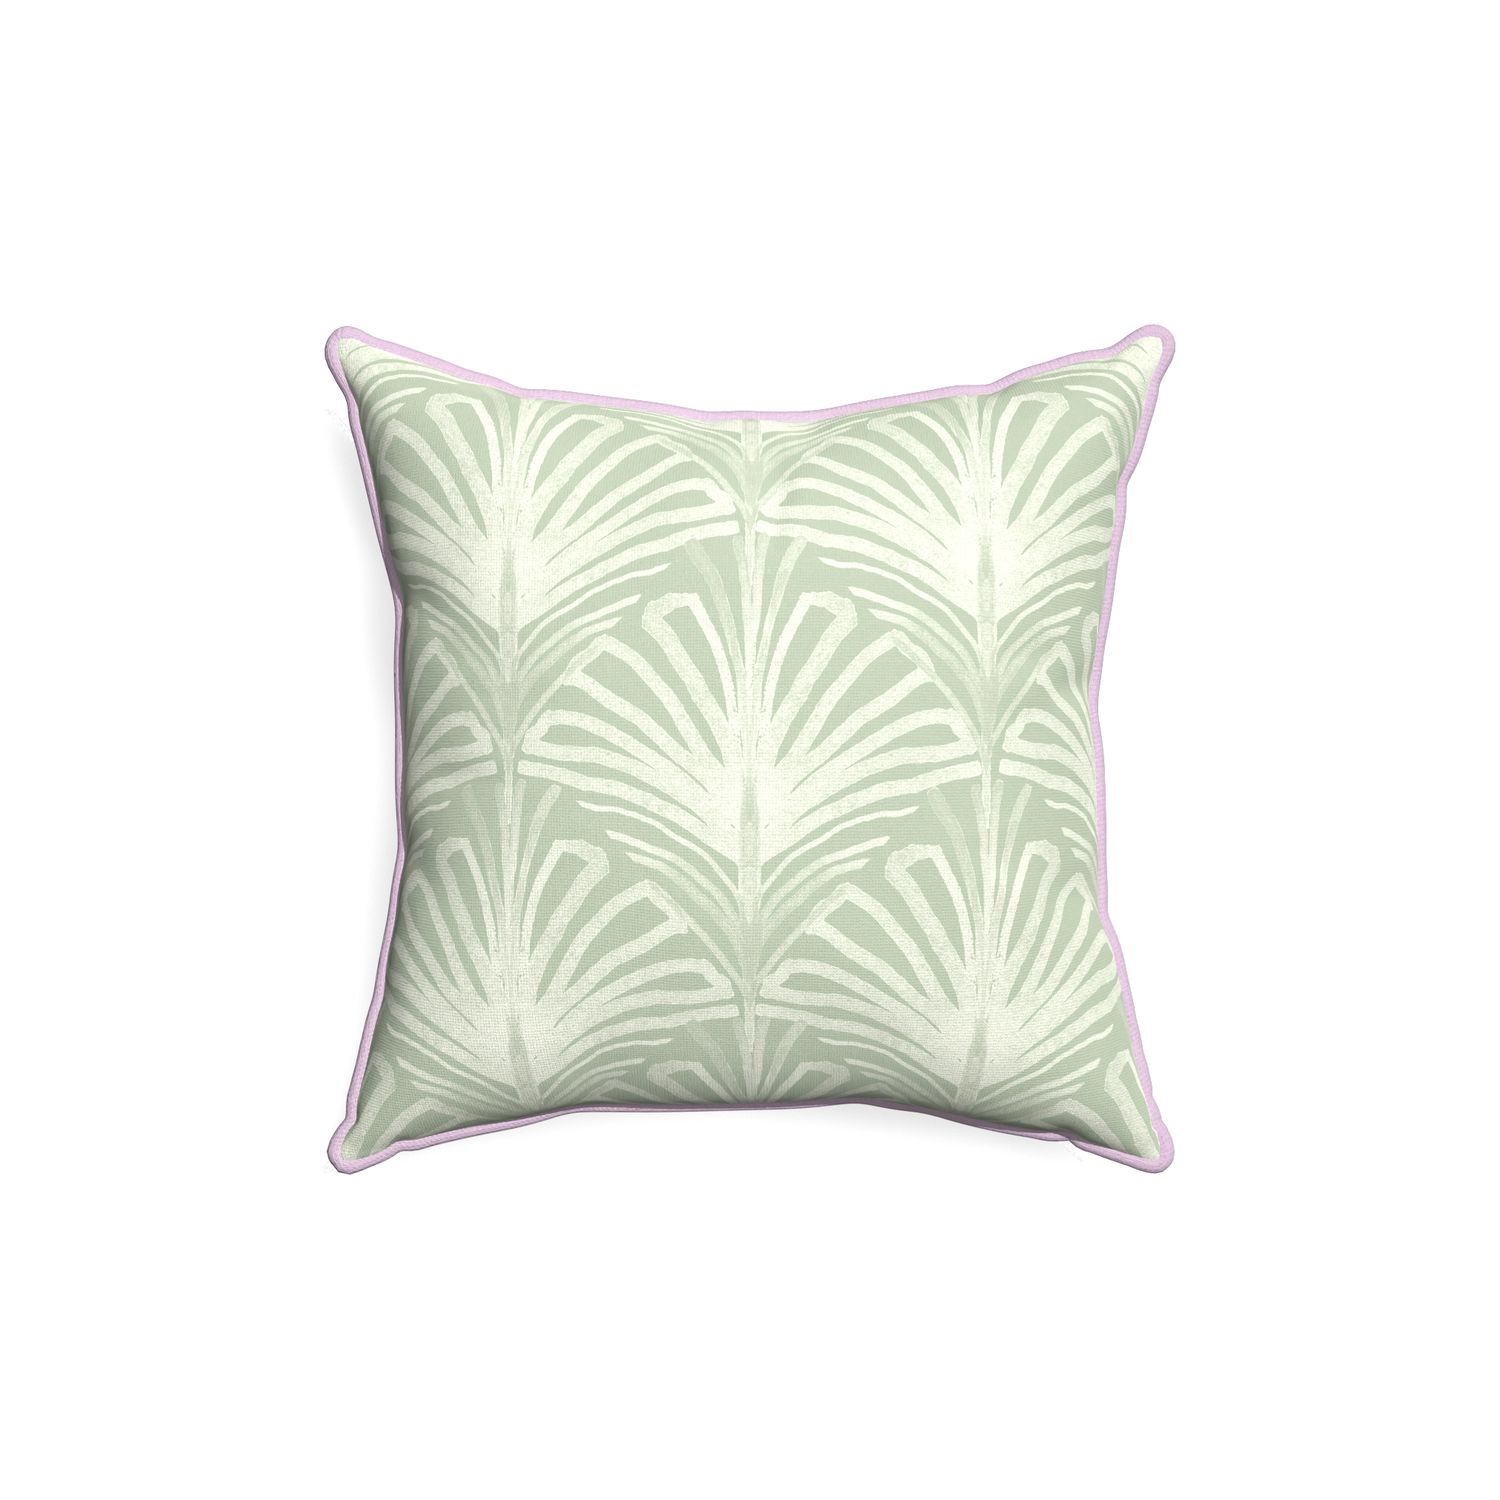 18-square suzy sage custom pillow with l piping on white background